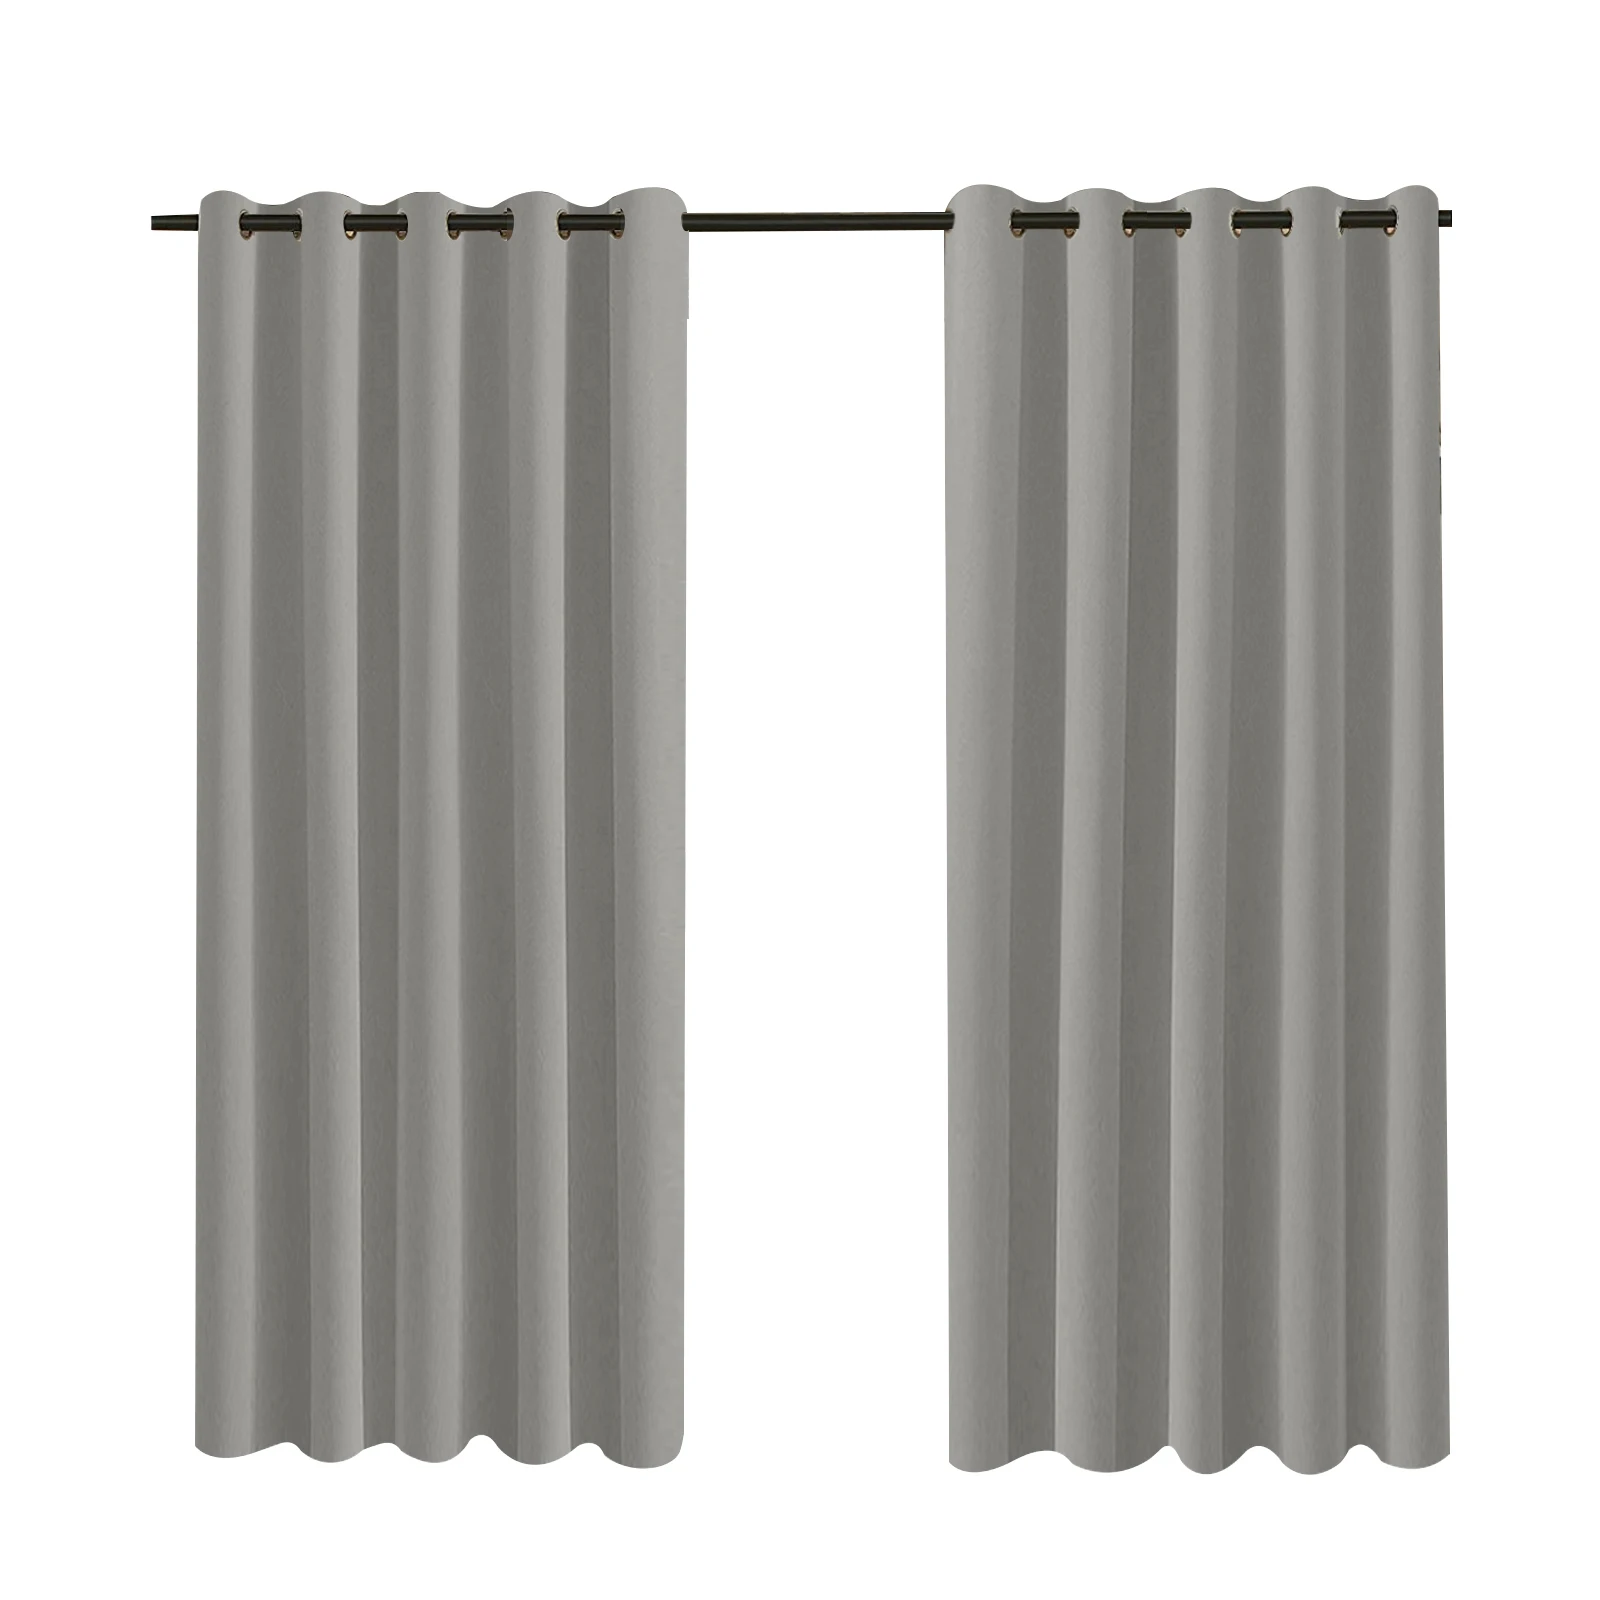 180cm Wide Large Patio Pergola Blackout Curtains Outdoor Waterproof Windproof Window Drapes Home Thermal Insulated Curtain Decor 